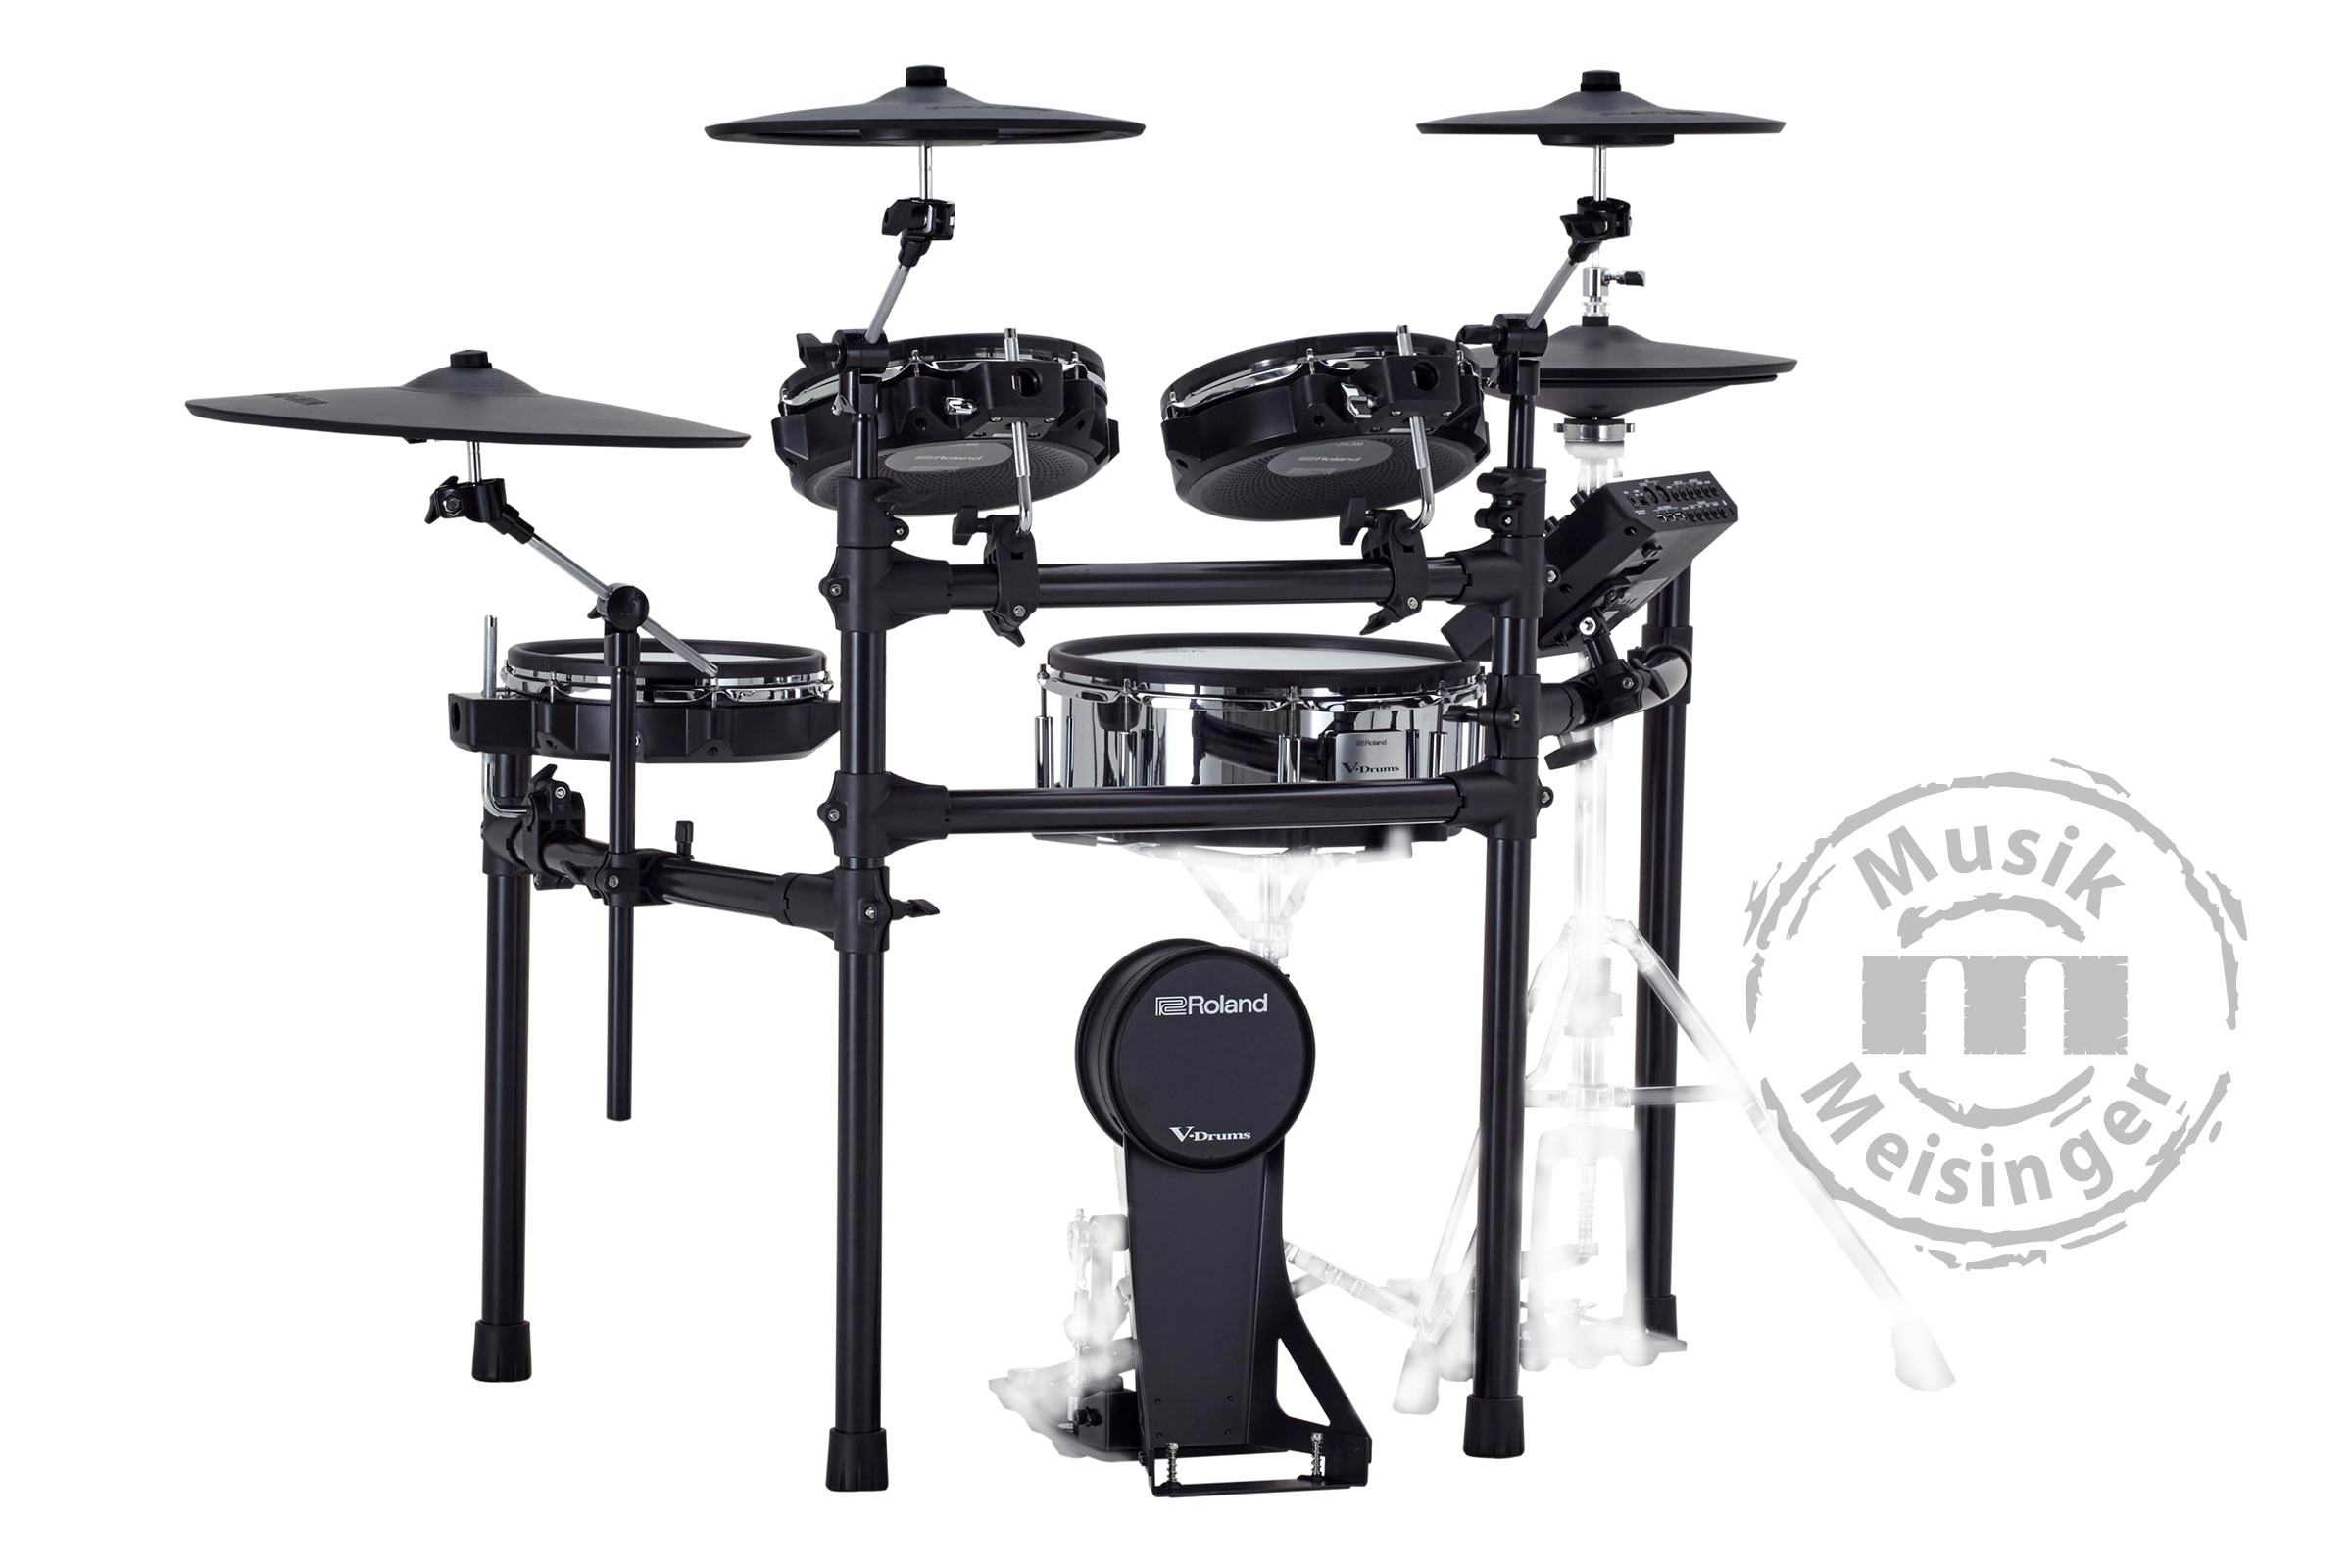 Roland TD-27KV2 Compact E-Drum Kit inkl. MDS-S2